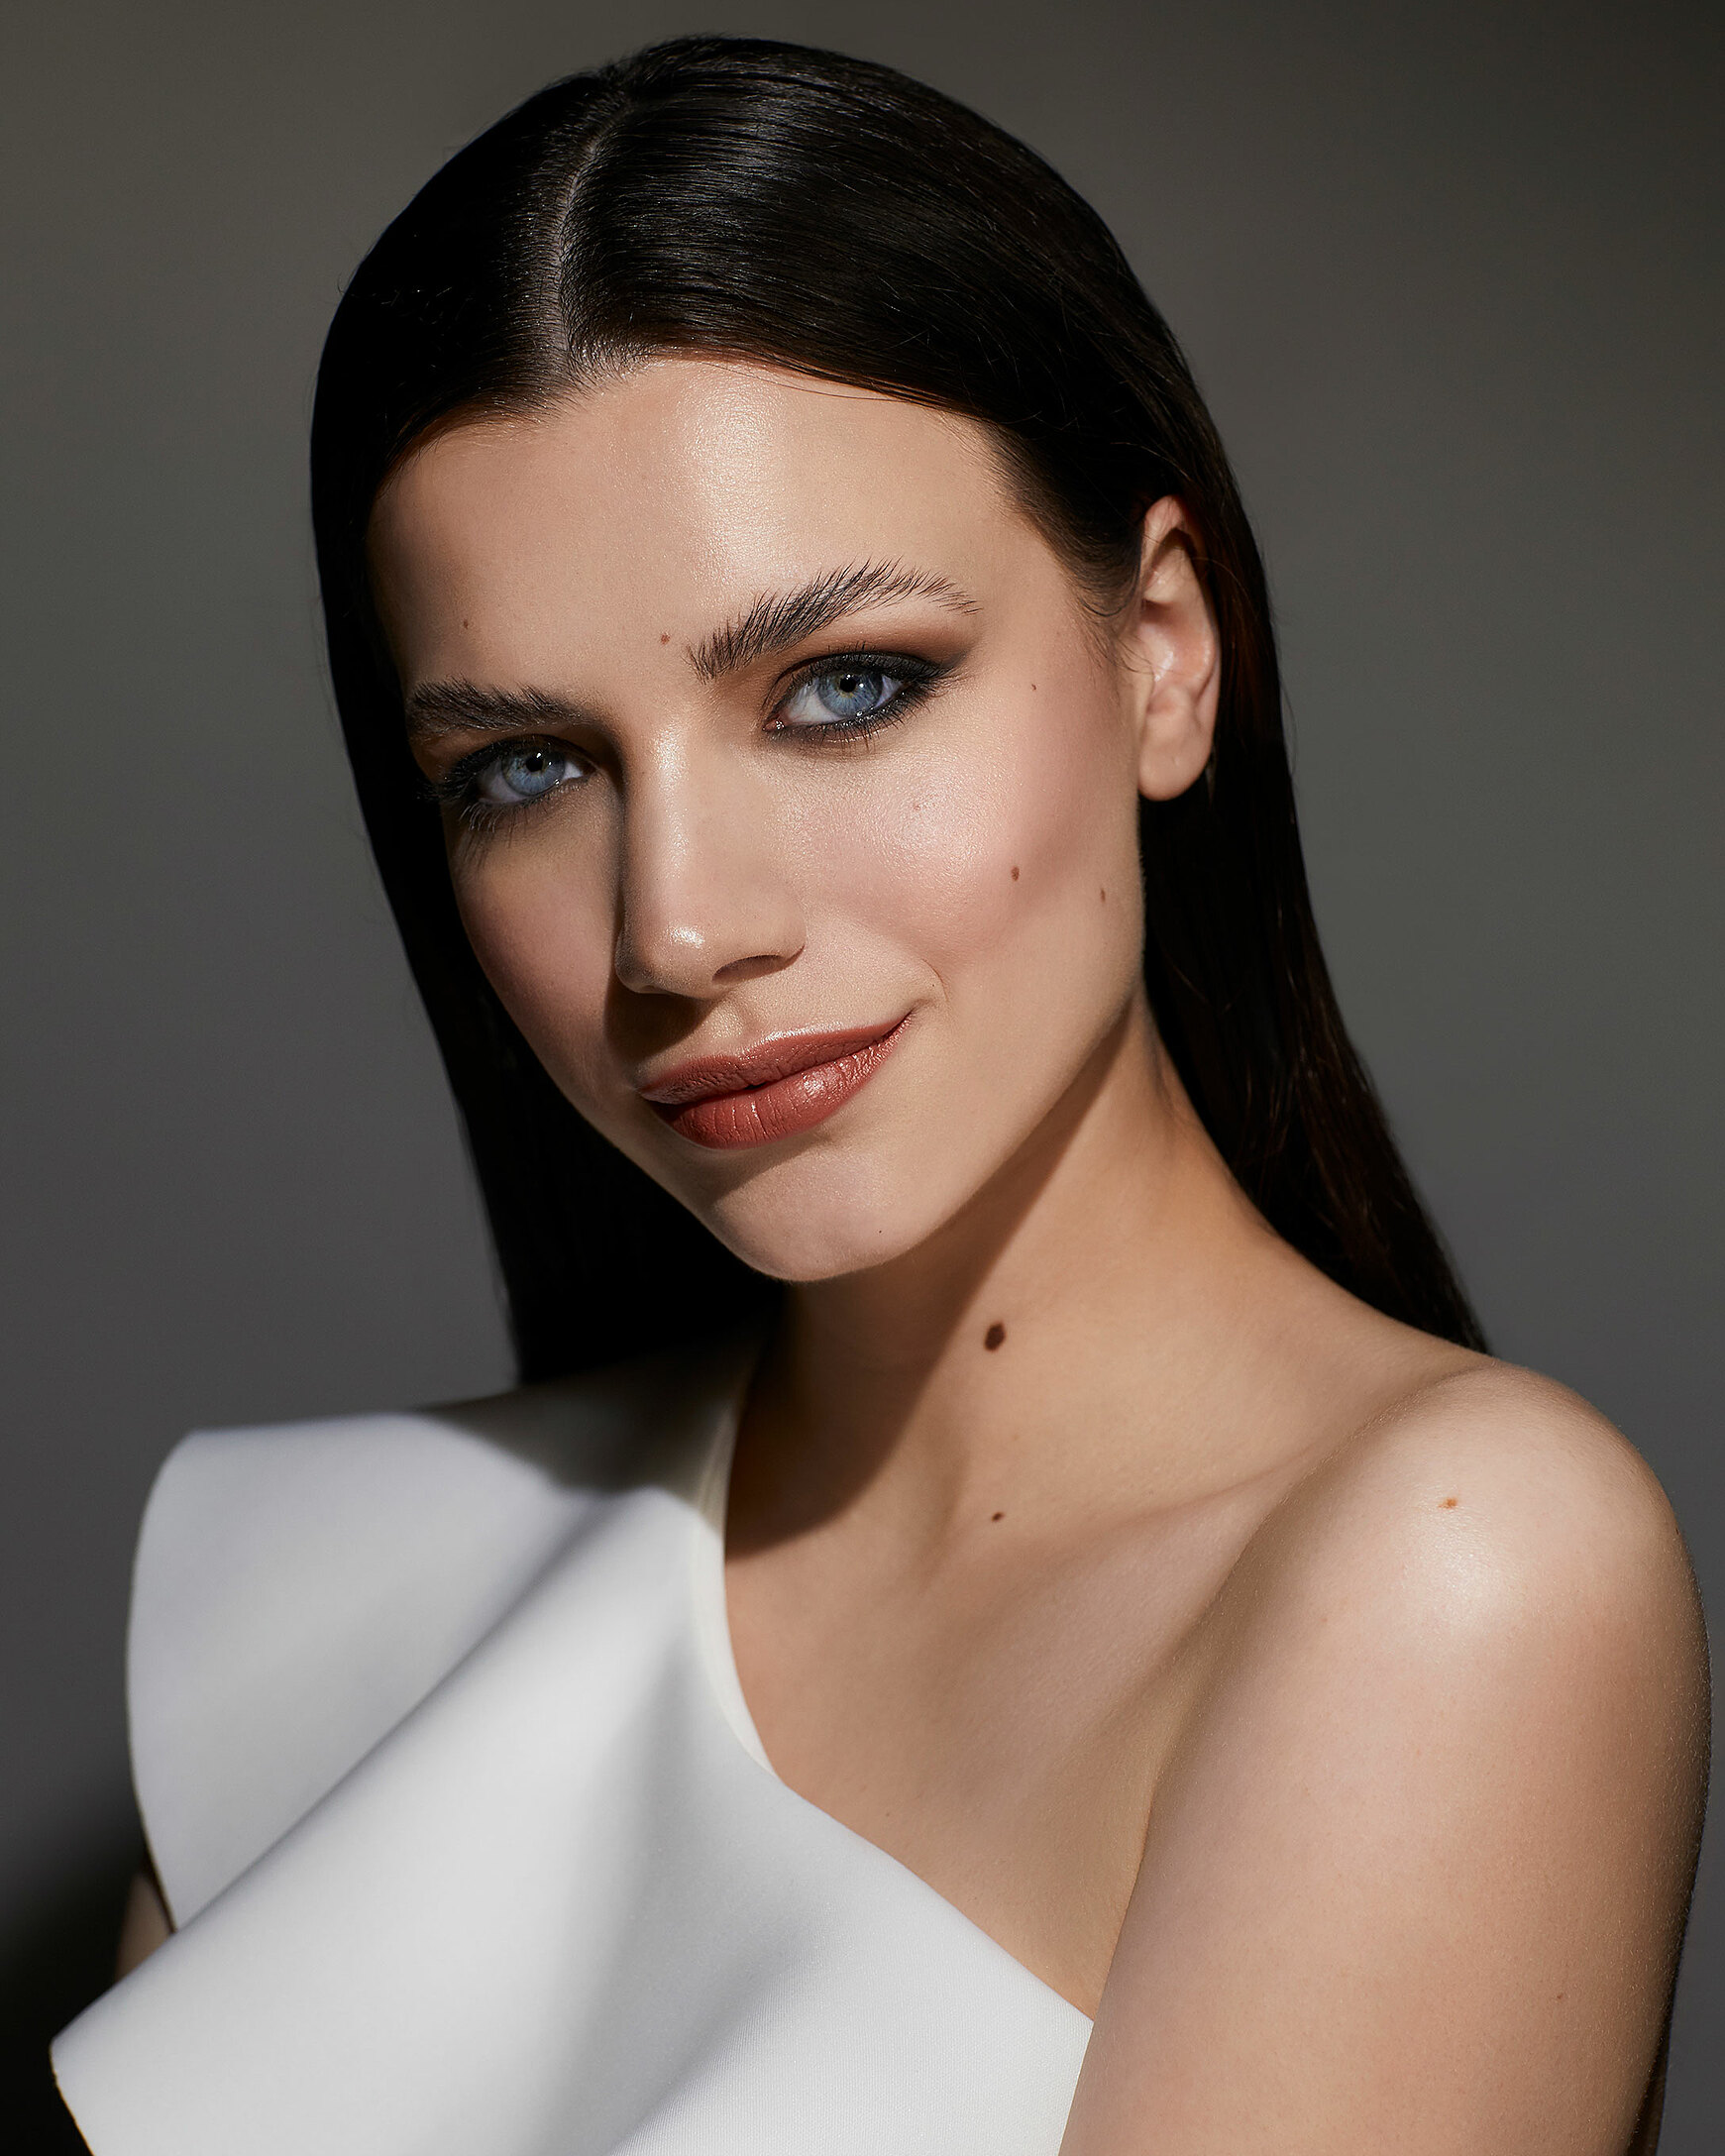 A close up of a female model with dark hair. She wears dark eyeshadow and a white dress with one shoulder.